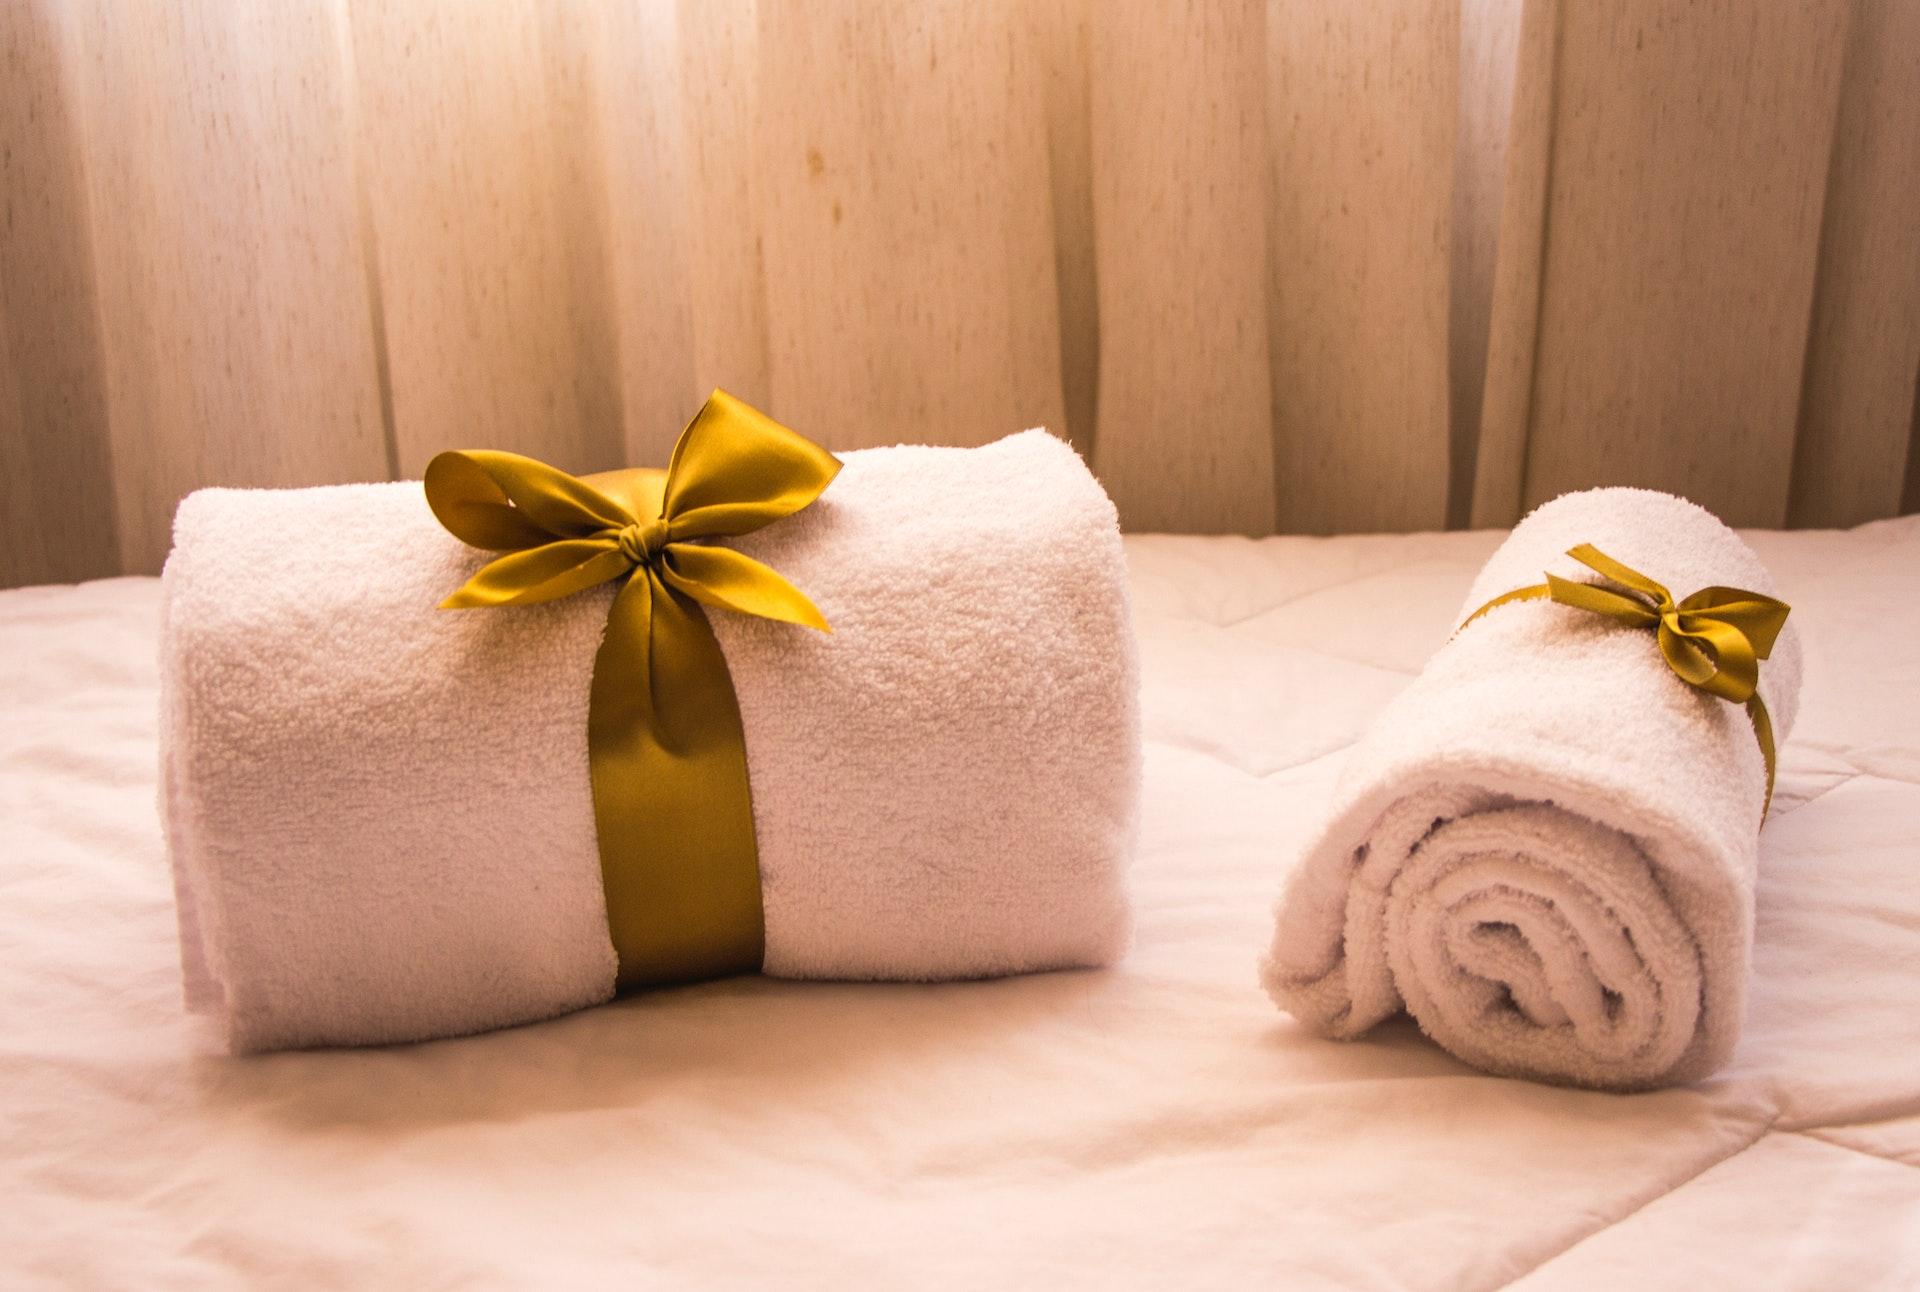 High Quality Luxury Towels Sale Sample Business Plan